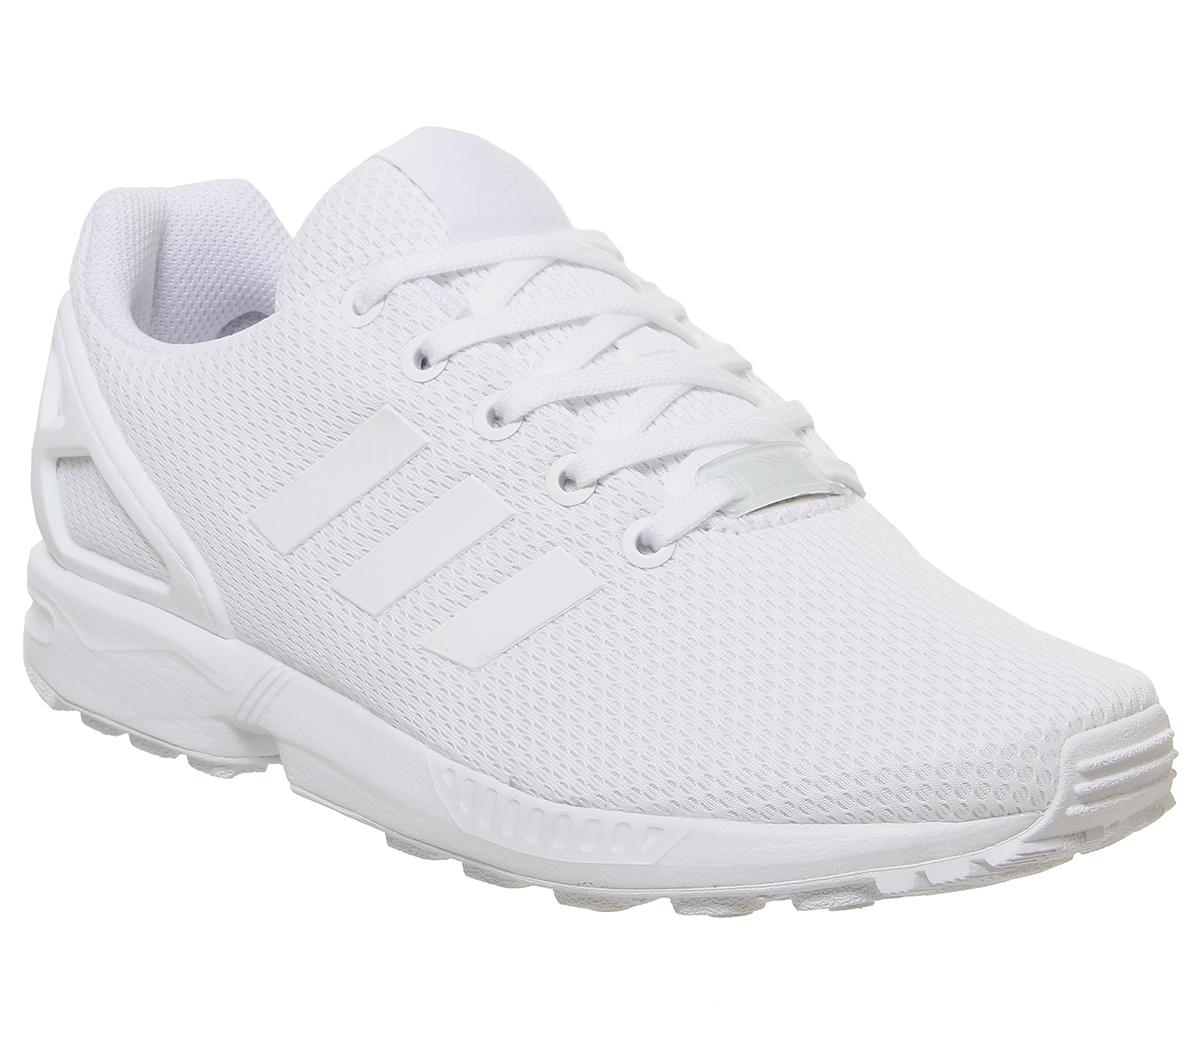 buy \u003e adidas zx flux junior size 6, Up to 69% OFF